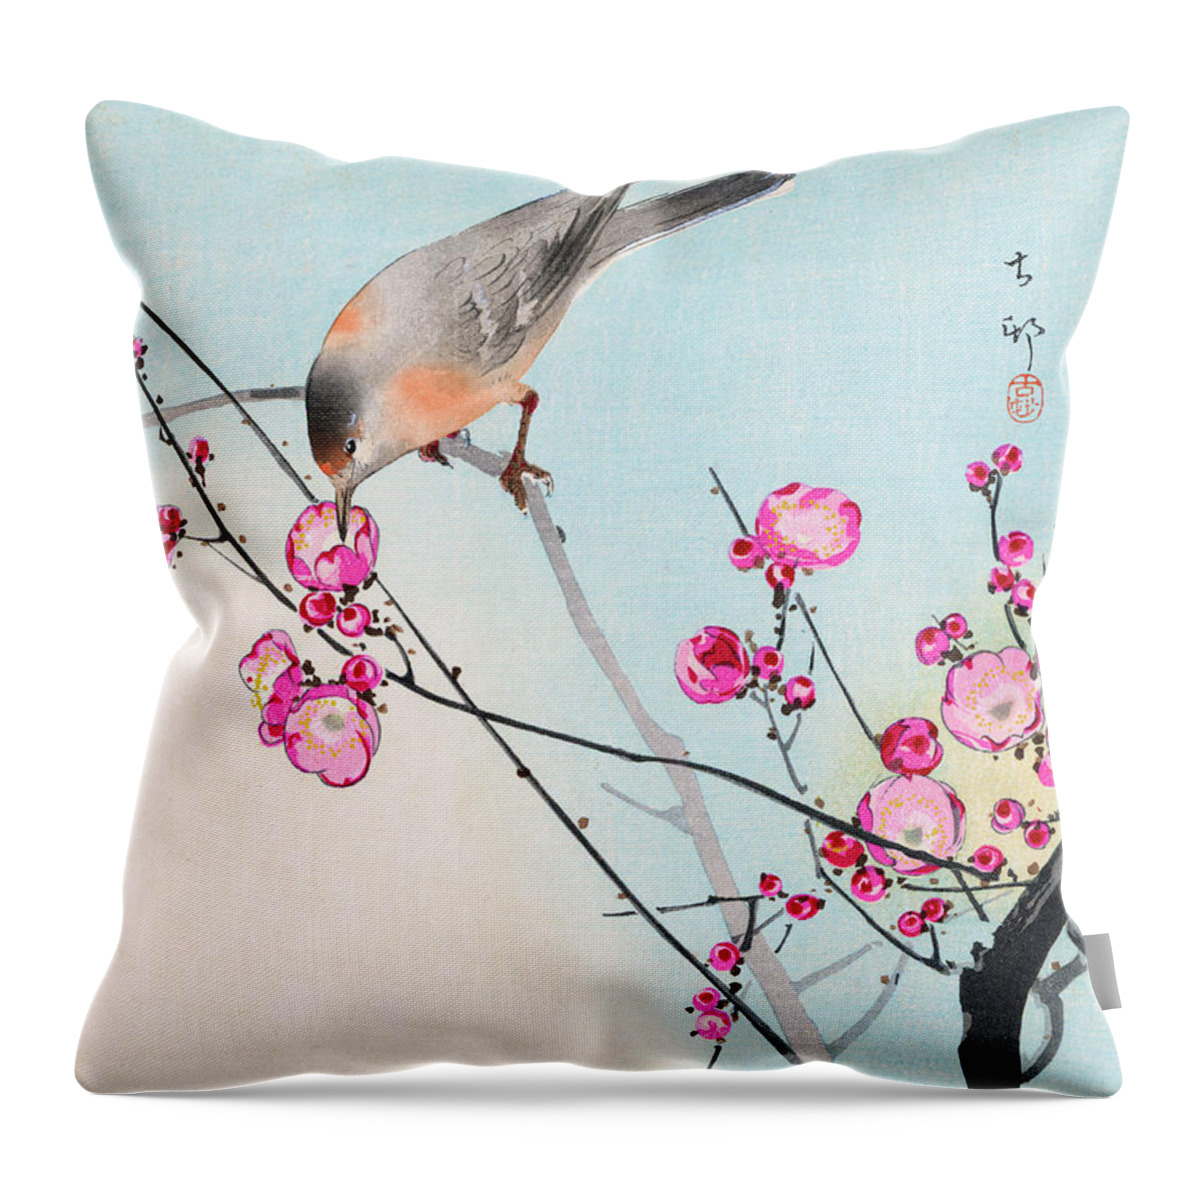 Koson Throw Pillow featuring the painting Nightingale by Koson